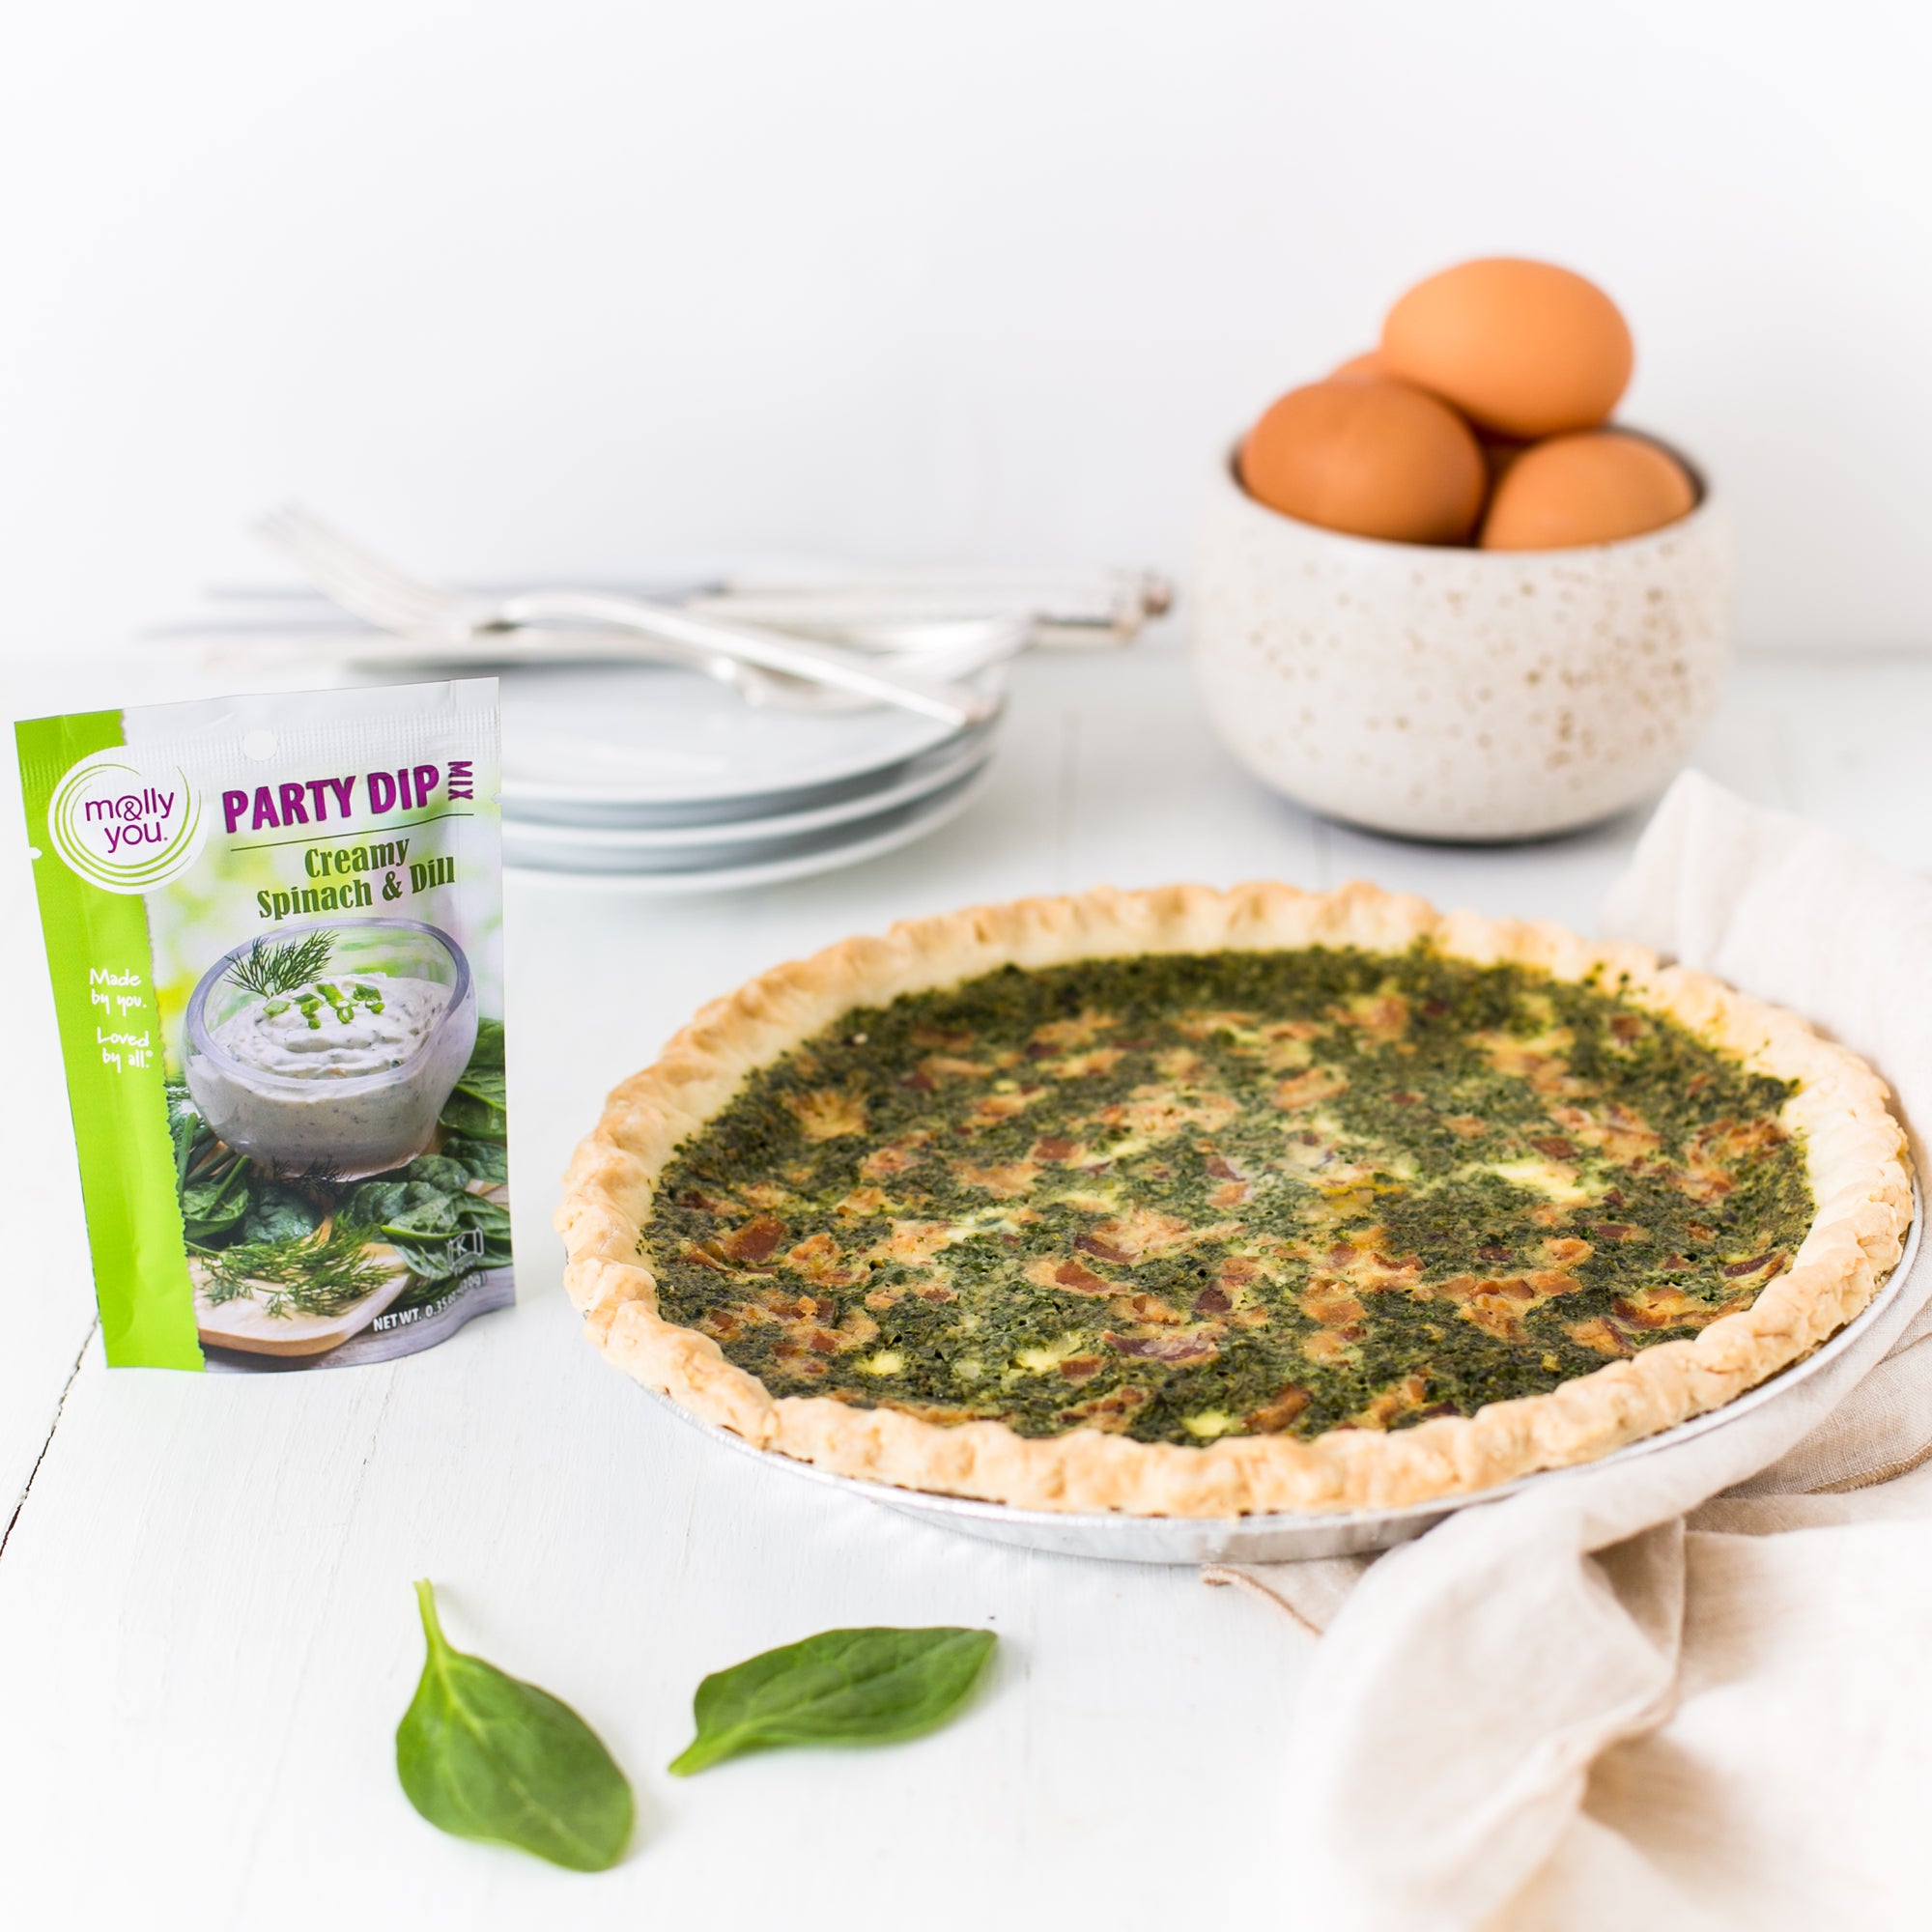 Spinach Bacon Quiche Made with molly&you Creamy Spinach & Dill Party Dip Mix